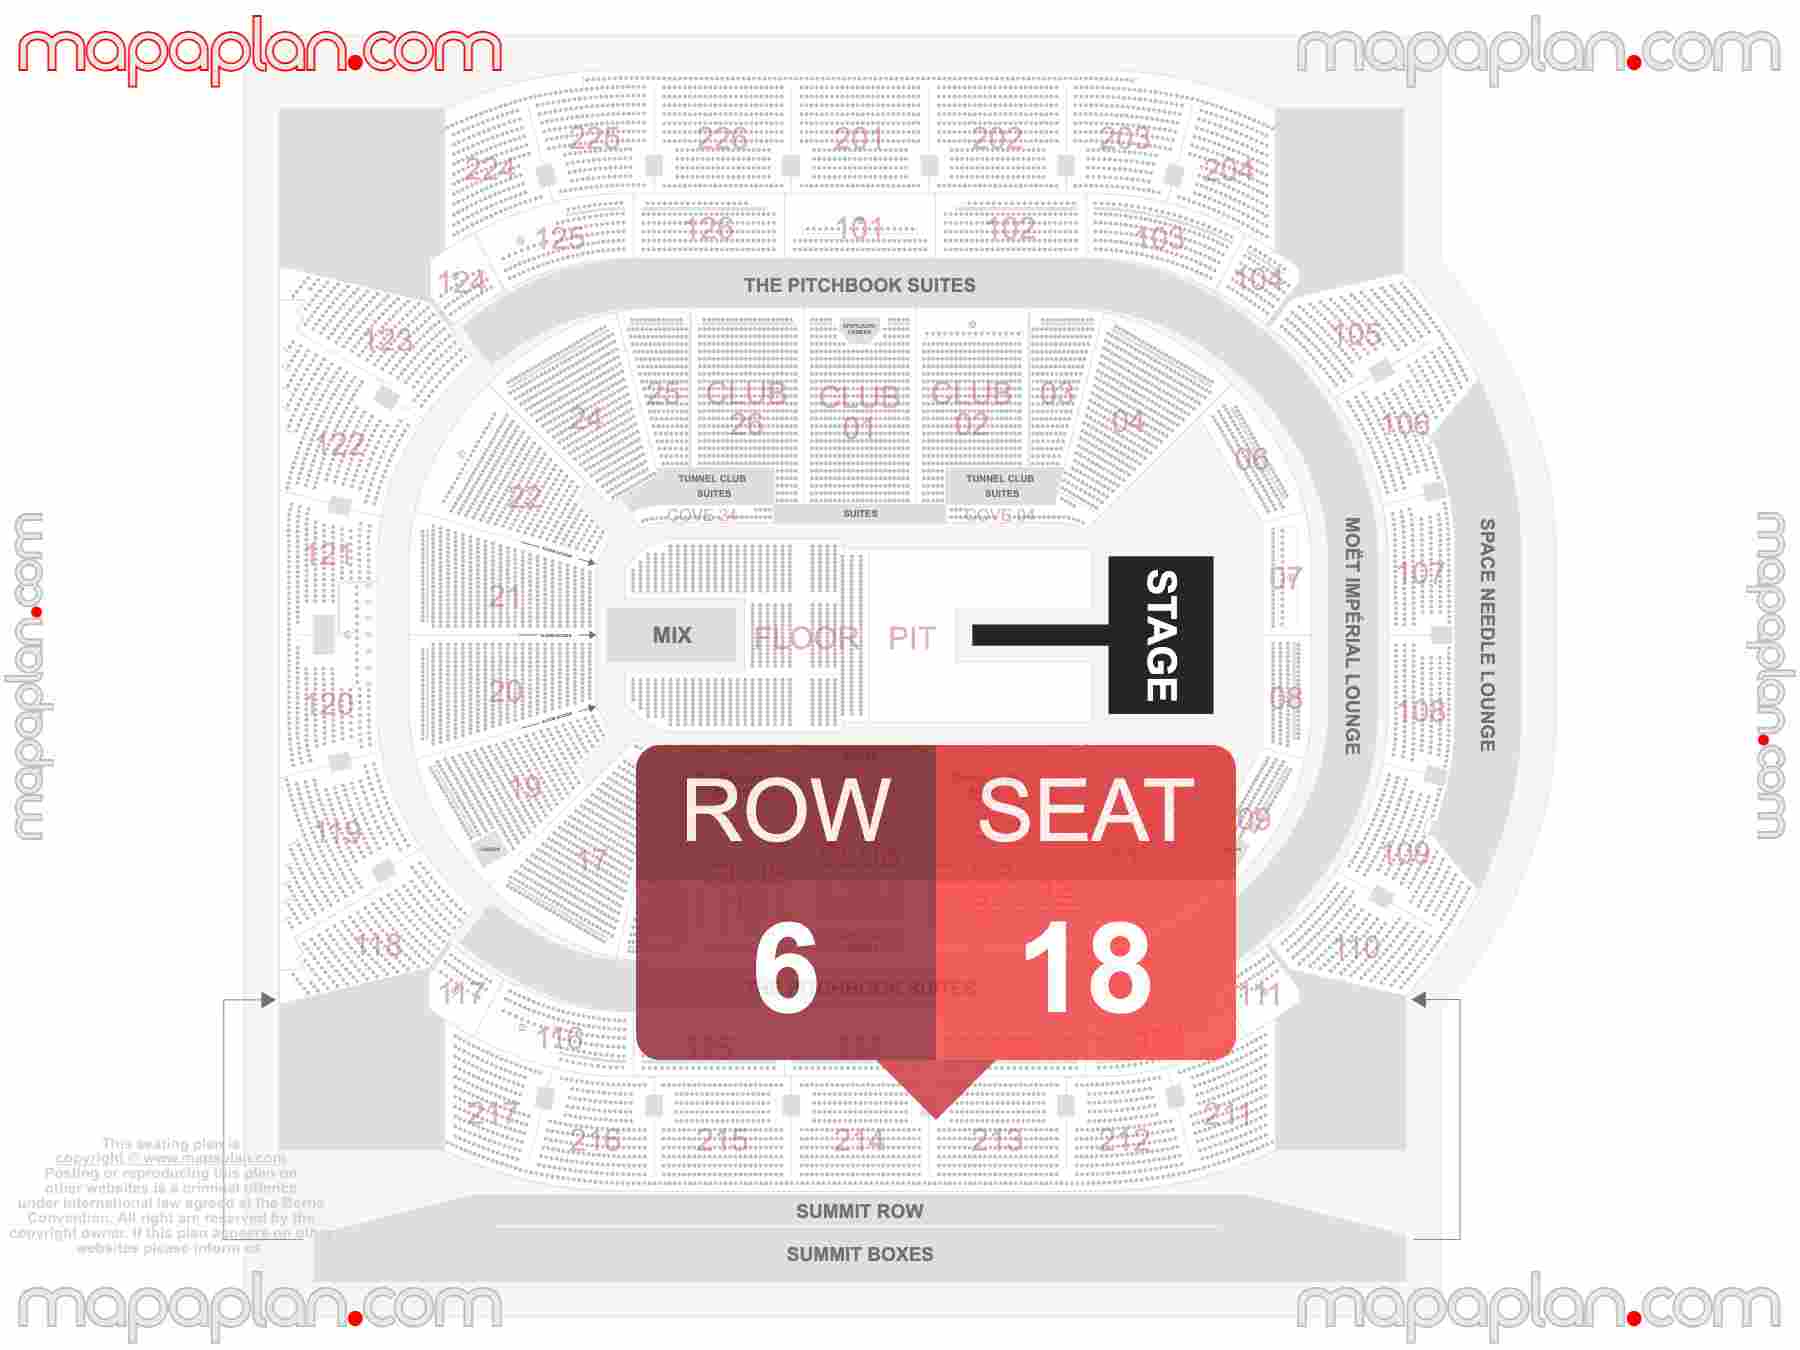 Seattle Climate Pledge Arena seating chart Concert with extended catwalk runway B-stage seating chart with exact section numbers showing best rows and seats selection 3d layout - Best interactive seat finder tool with precise detailed location data